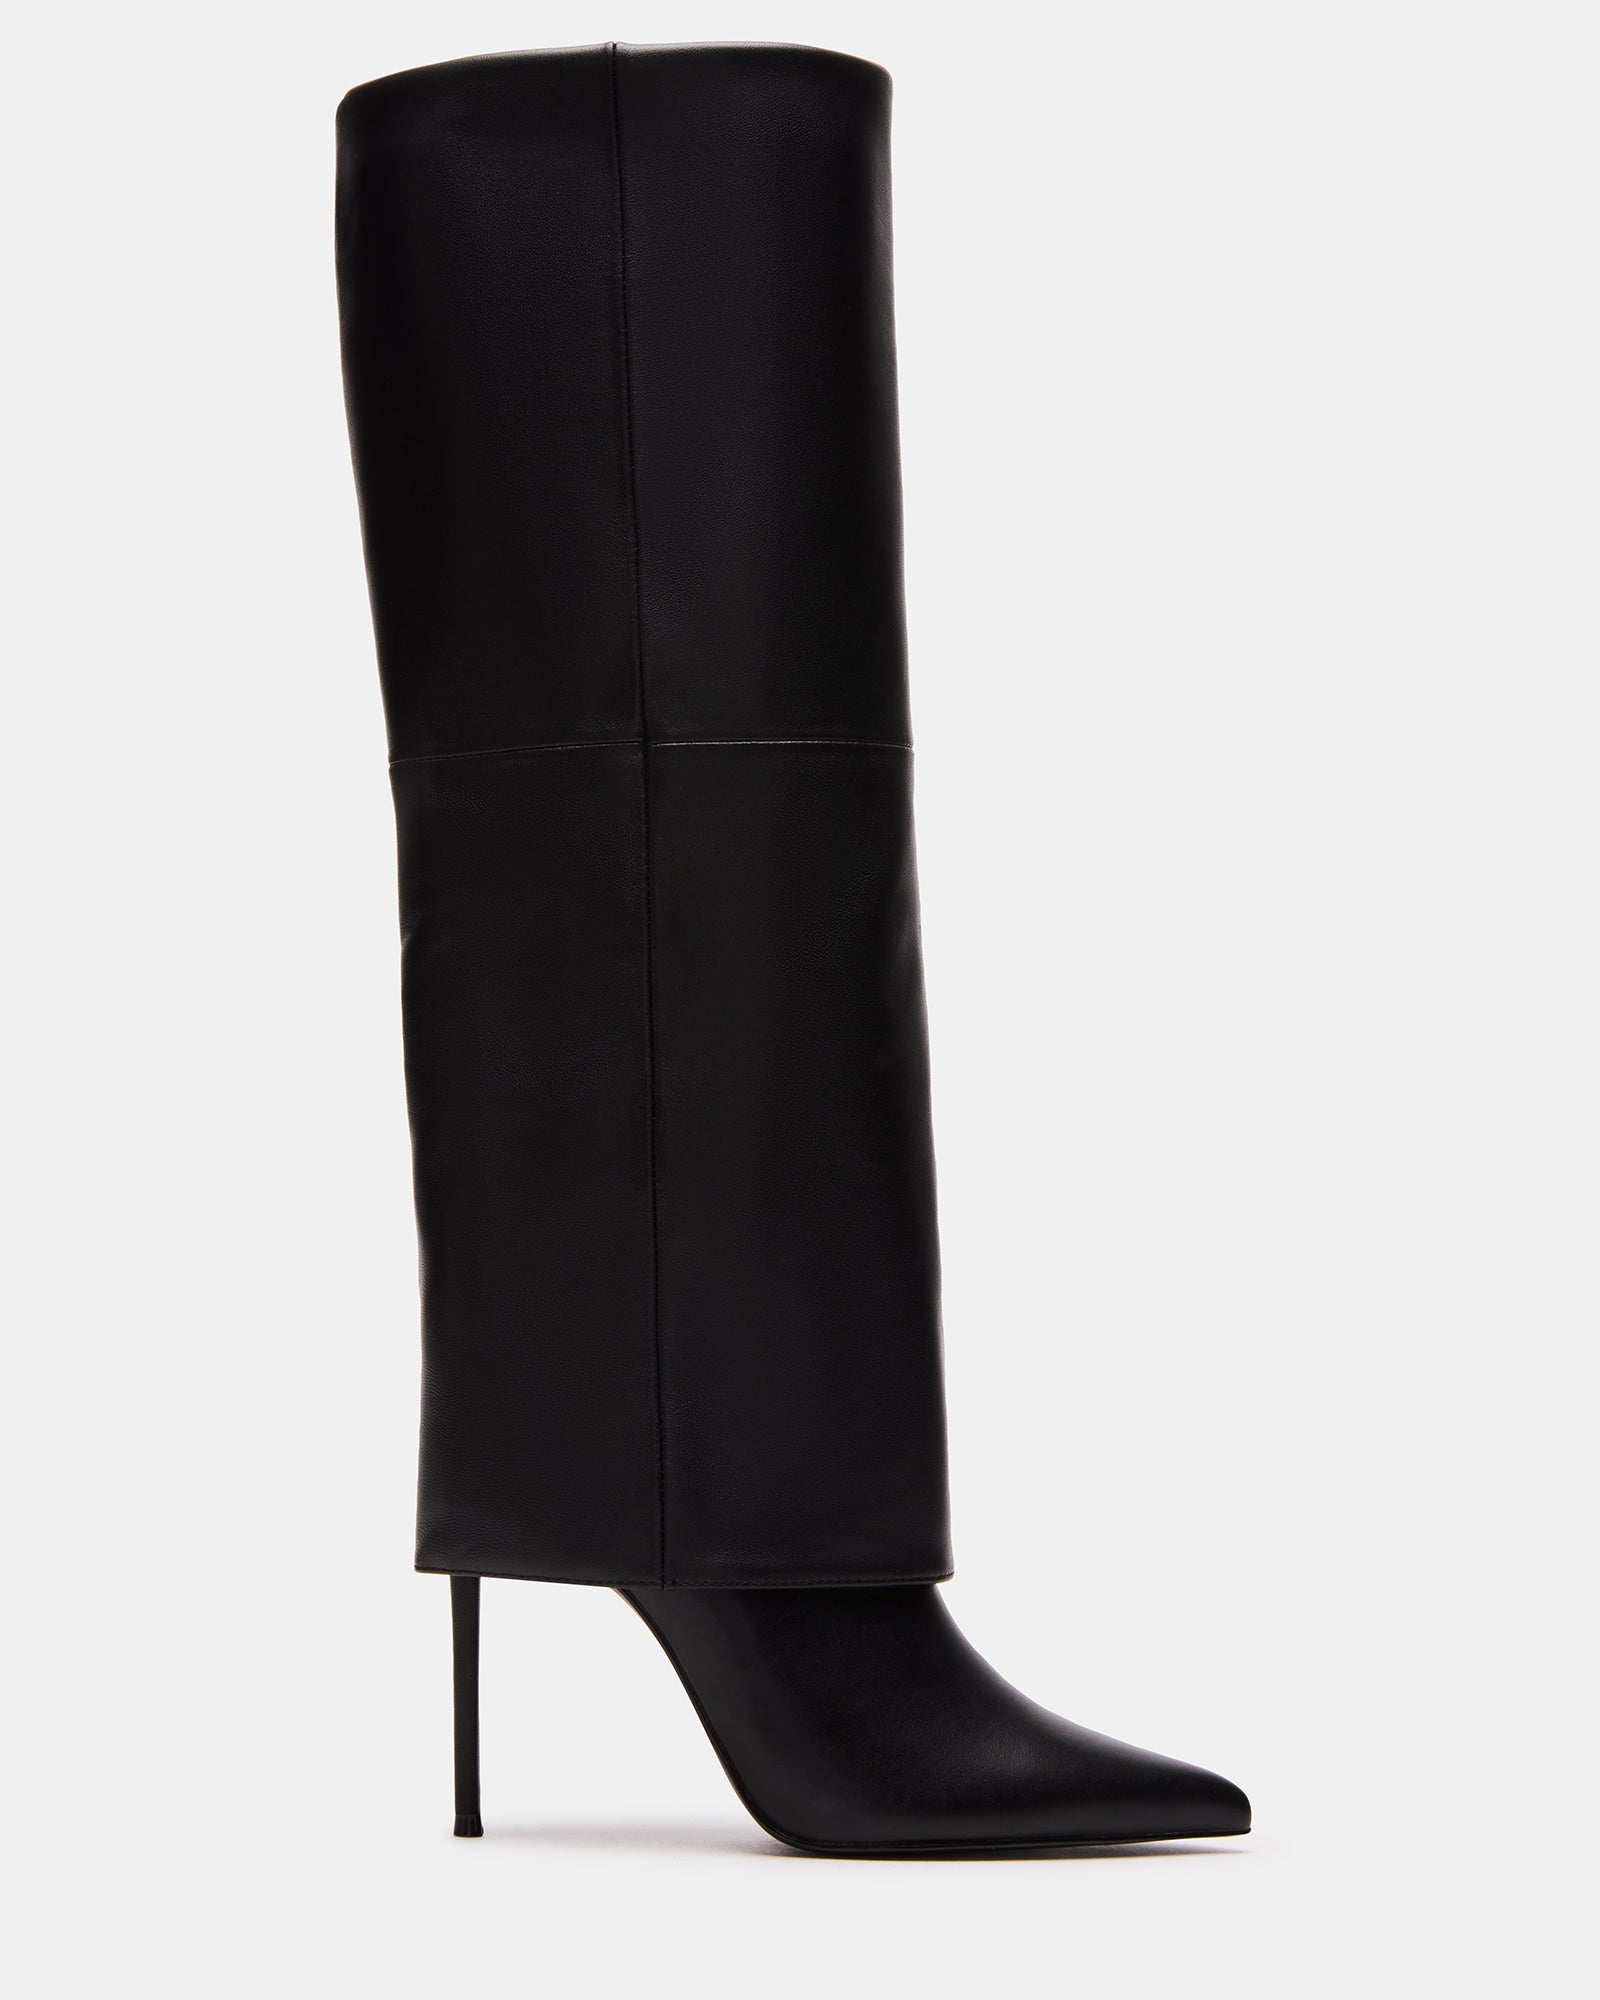 SMITH Black Leather Cuffed Stiletto Boot | Women's Boots – Steve Madden